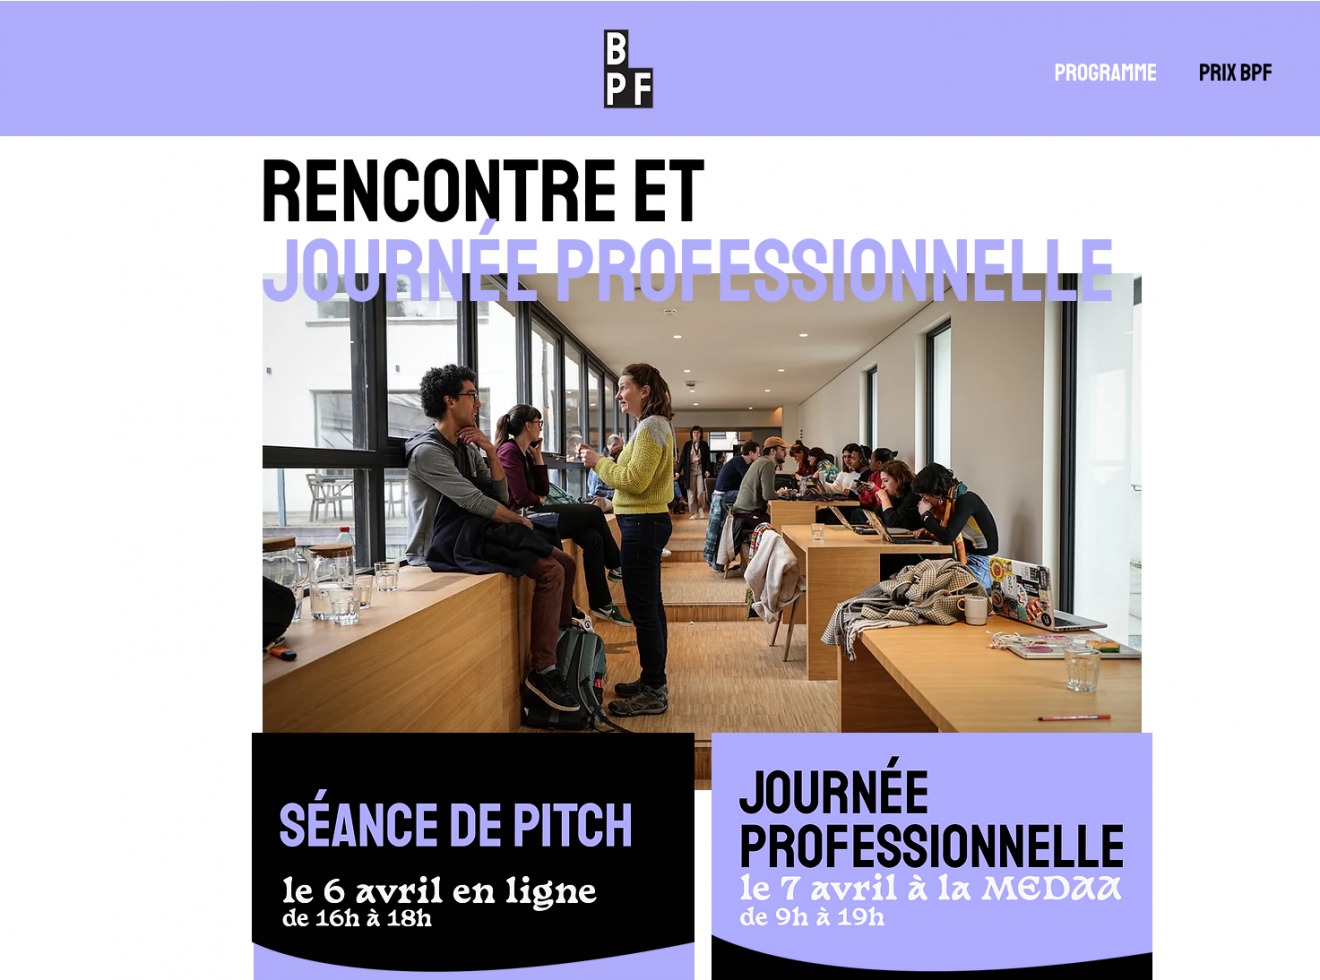 Brussels Podcast Festival : pitchs et rencontres